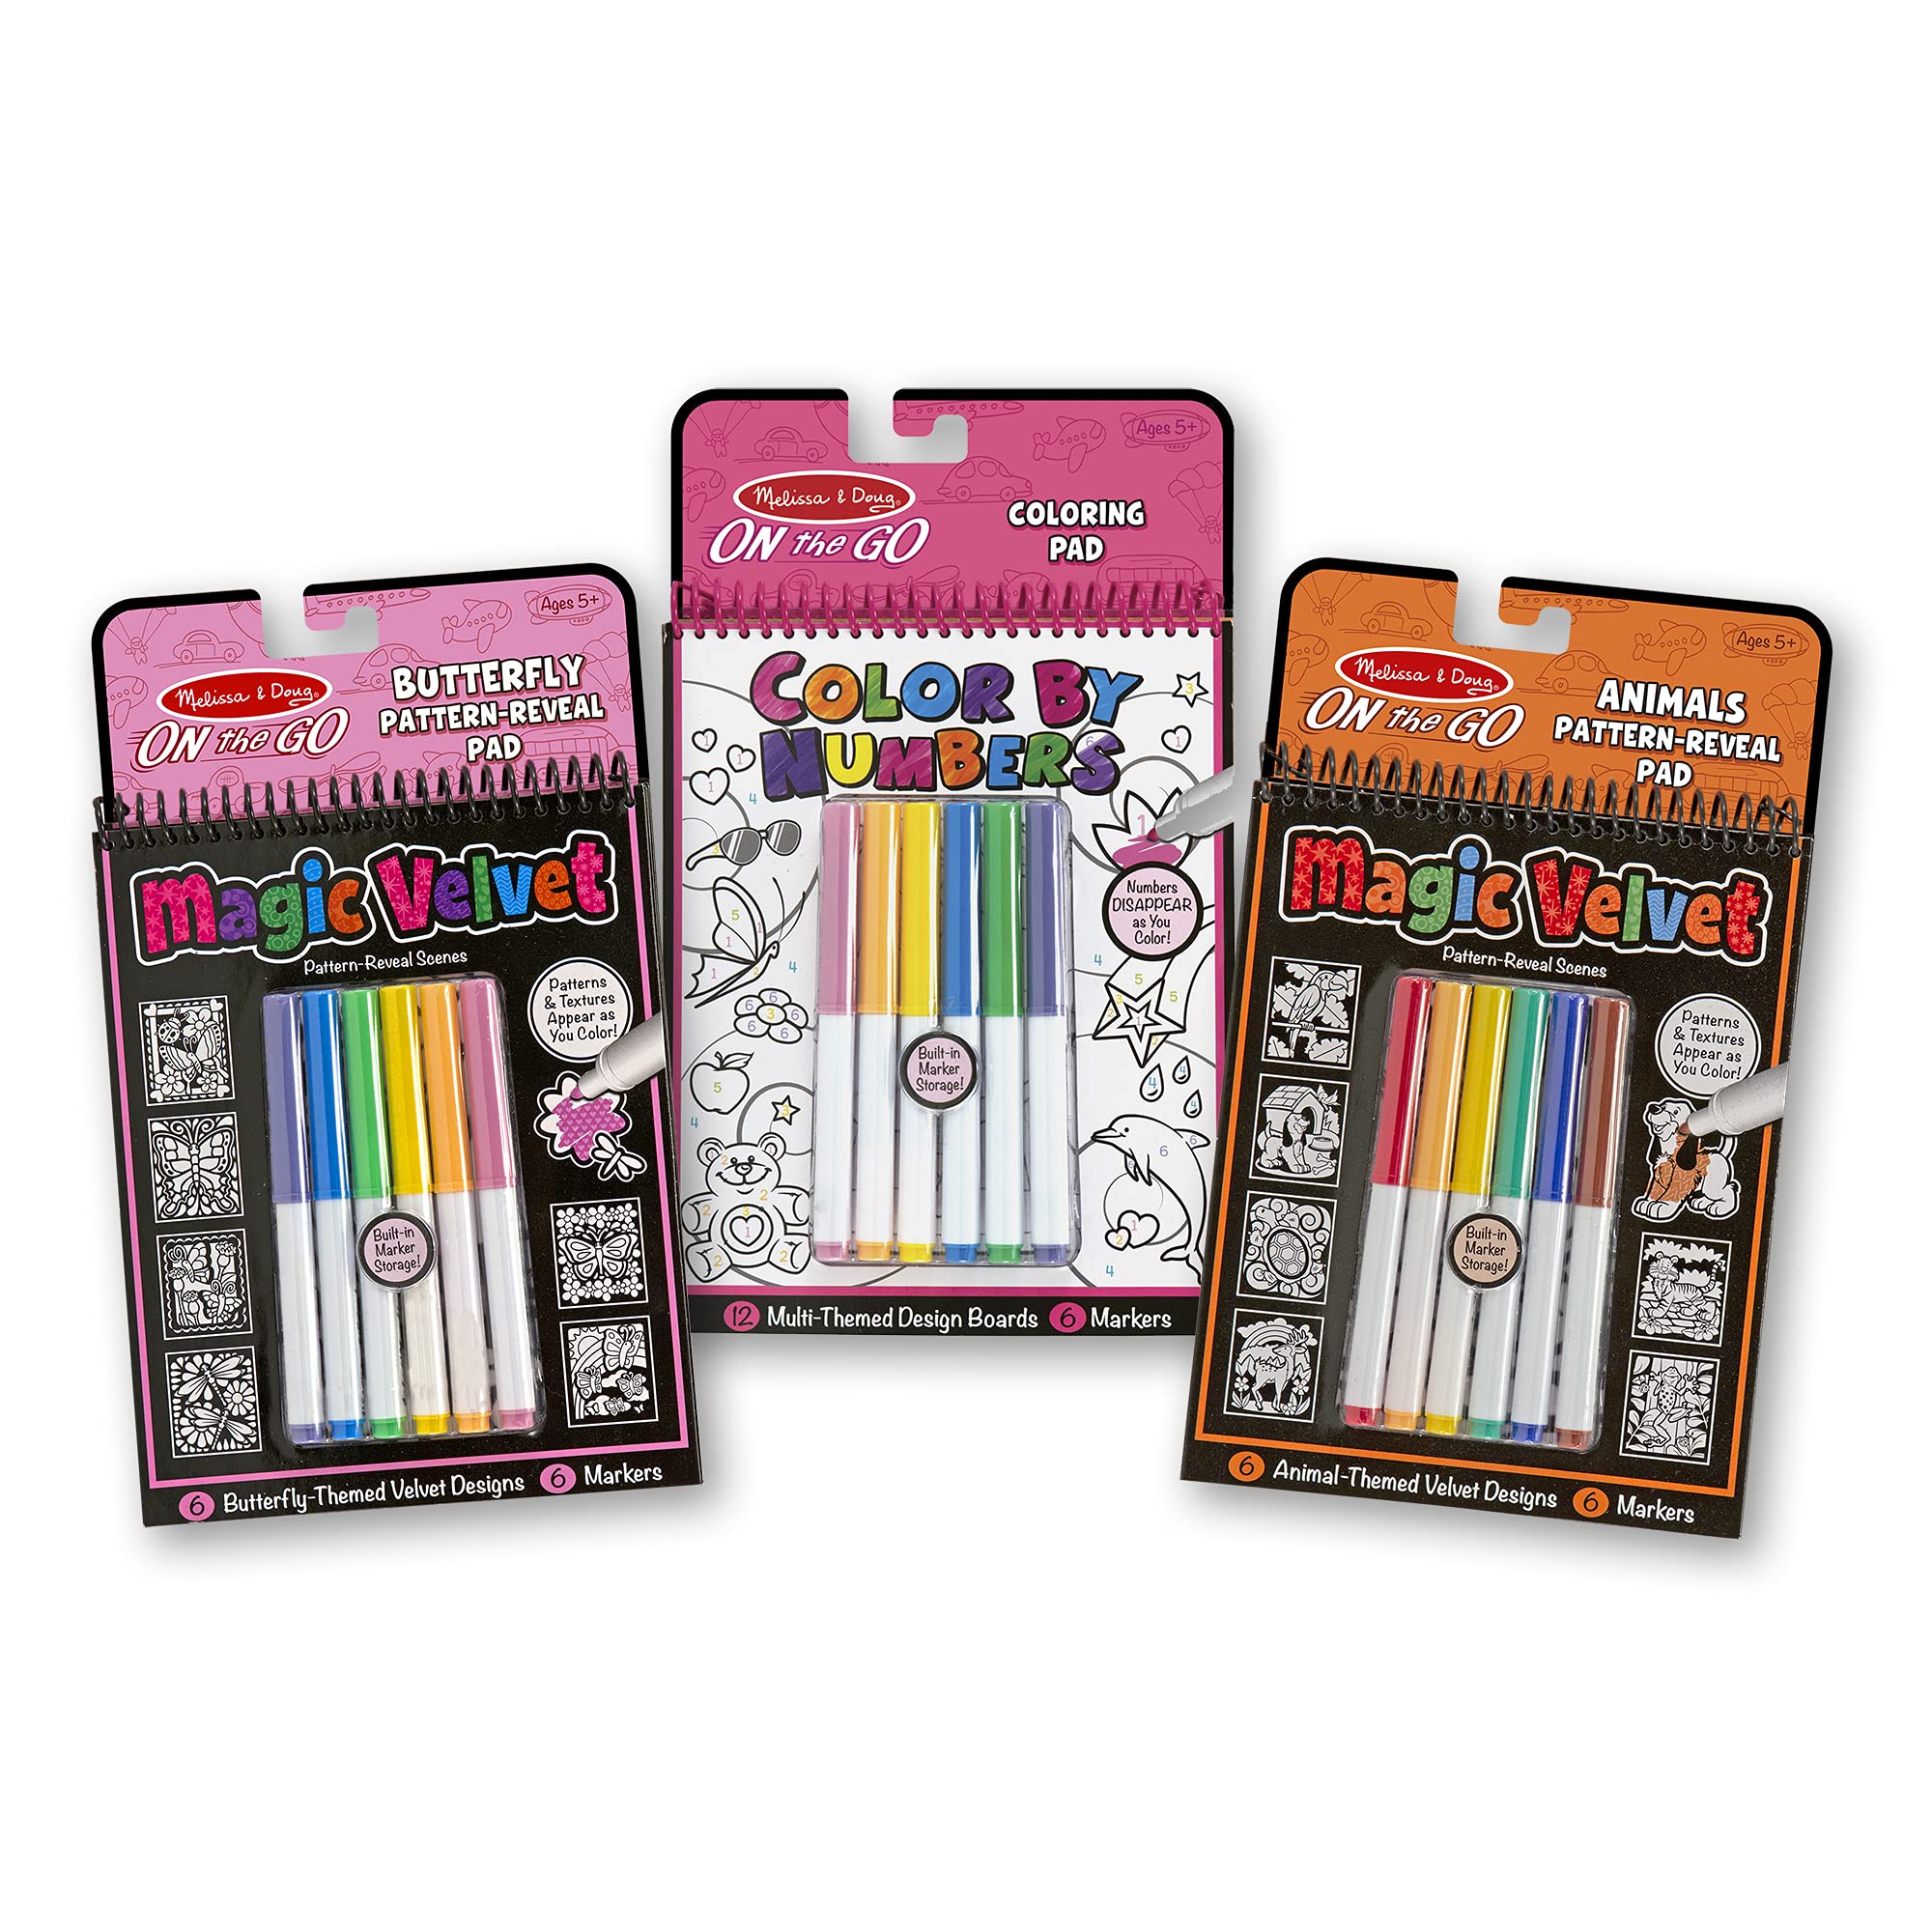 Small Victories Magic Velvet Pennant Coloring Set [Book]